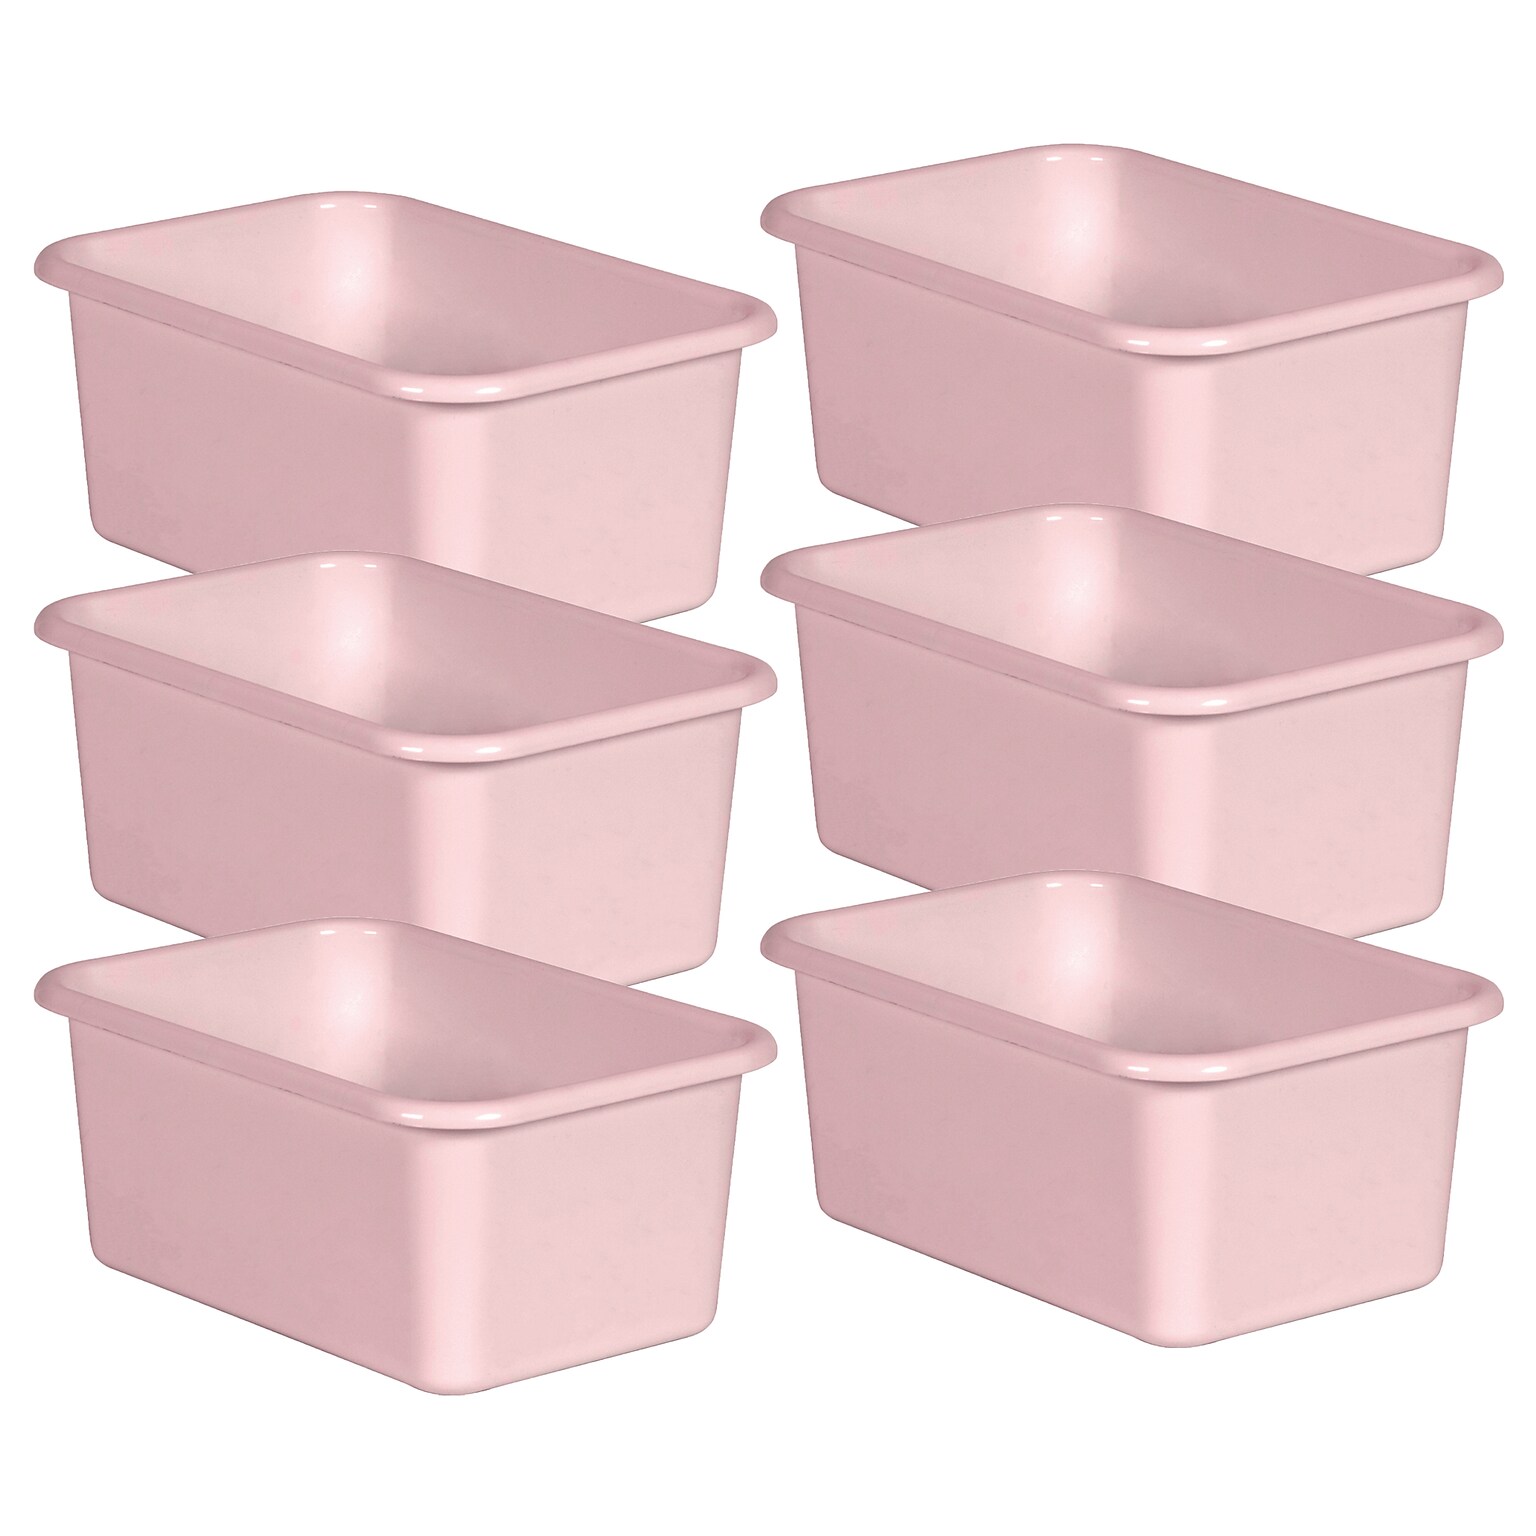 Teacher Created Resources® Plastic Storage Bin, Small, 7.75 x 11.38 x 5 , Blush Pink, Pack of 6 (TCR20398-6)